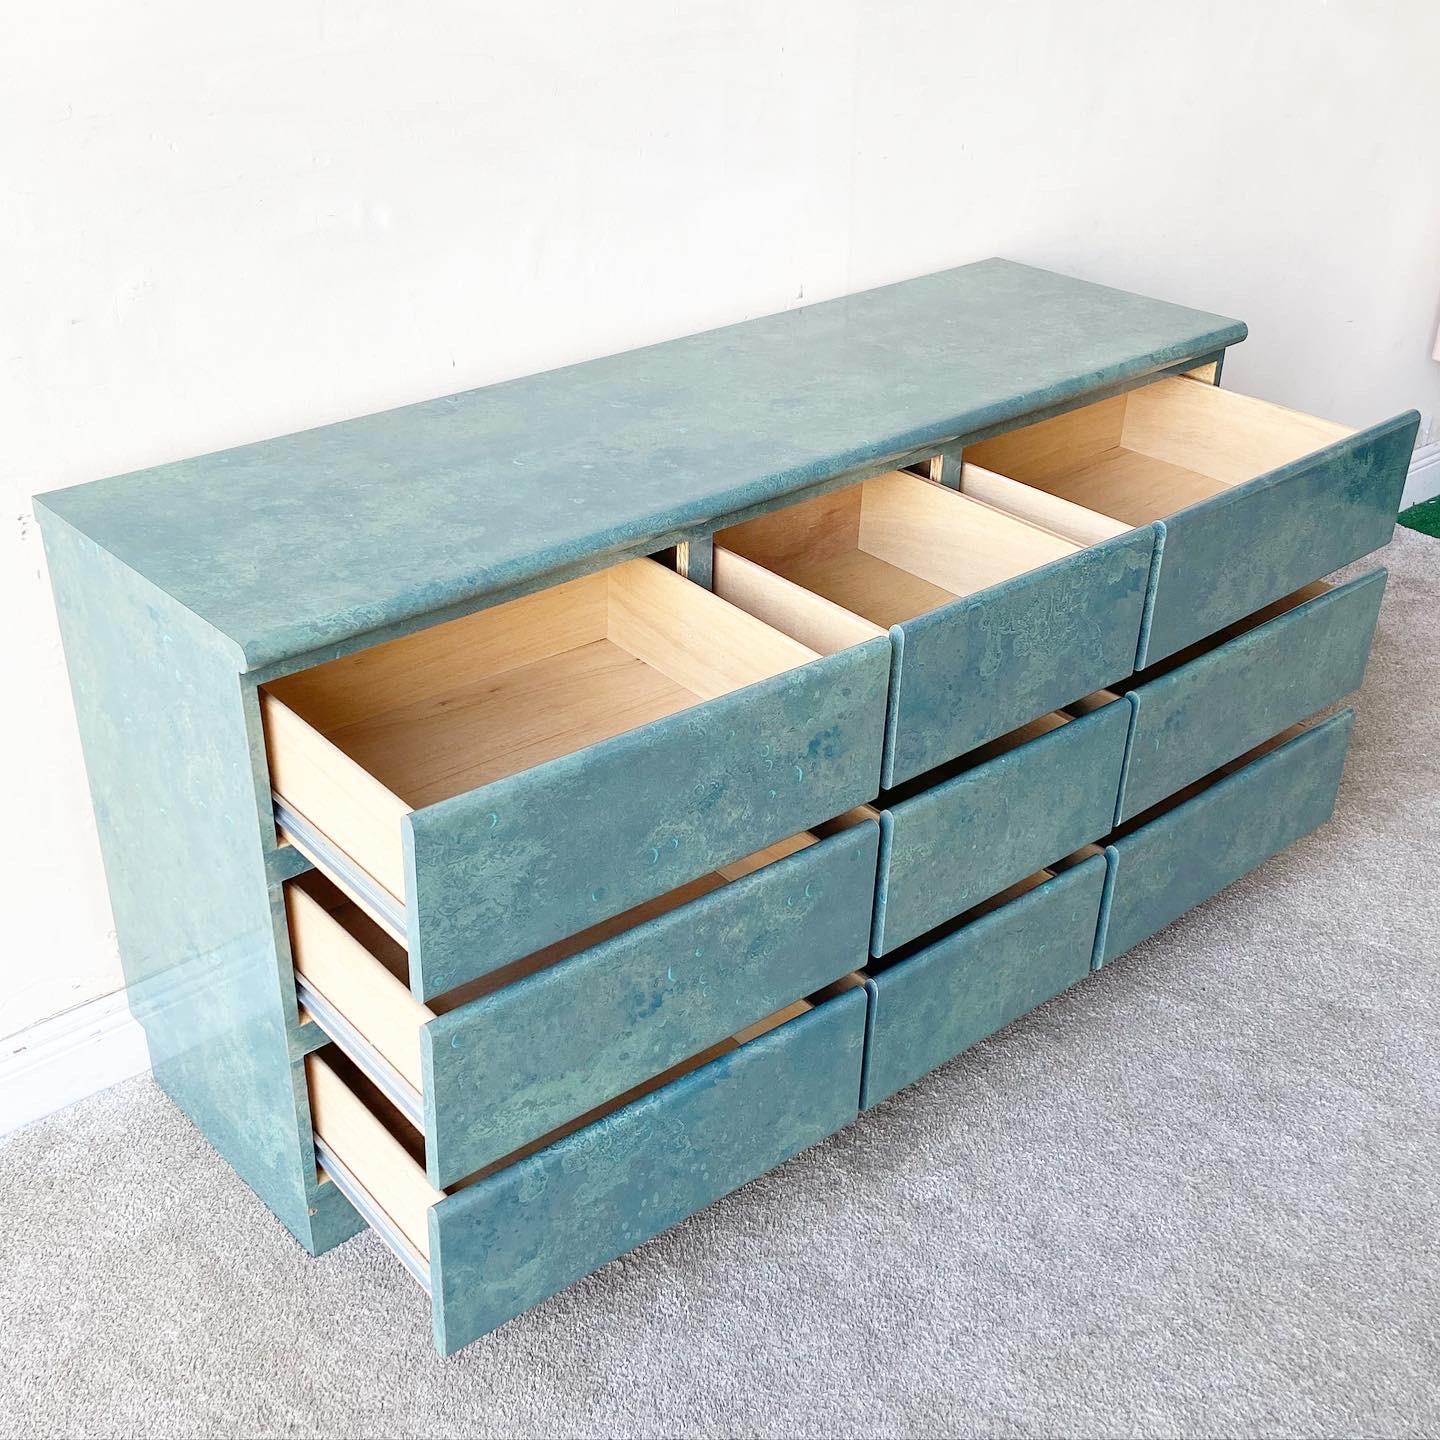 Late 20th Century Postmodern Aquaponic Lacquer Laminate Dresser - 9 Drawers